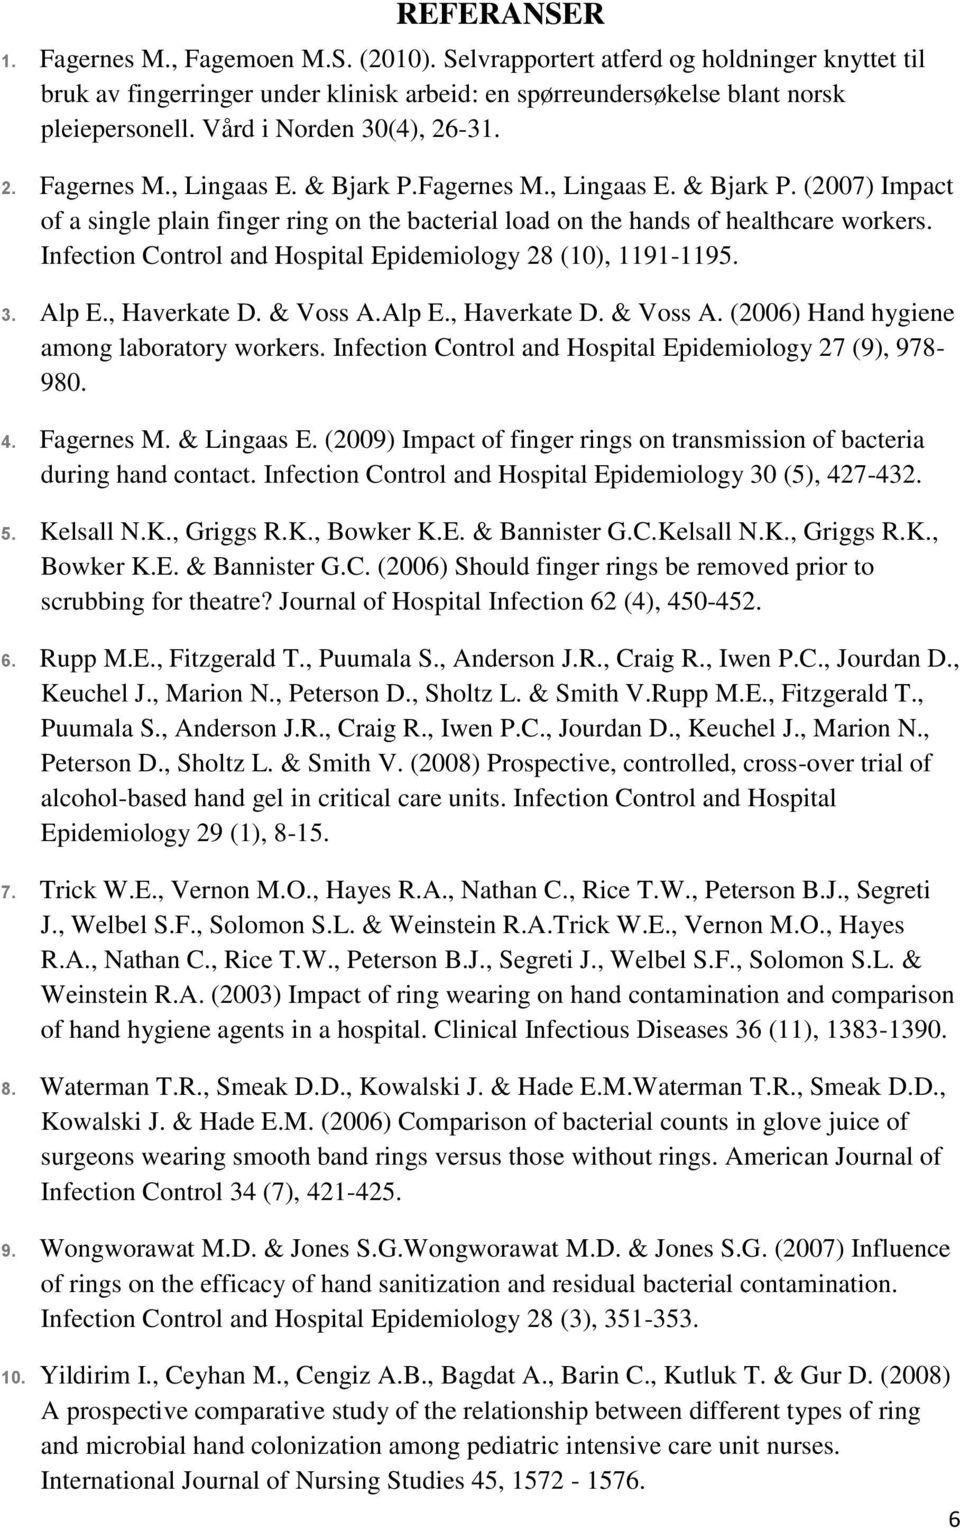 Infection Control and Hospital Epidemiology 28 (10), 1191-1195. 3. Alp E., Haverkate D. & Voss A.Alp E., Haverkate D. & Voss A. (2006) Hand hygiene among laboratory workers.